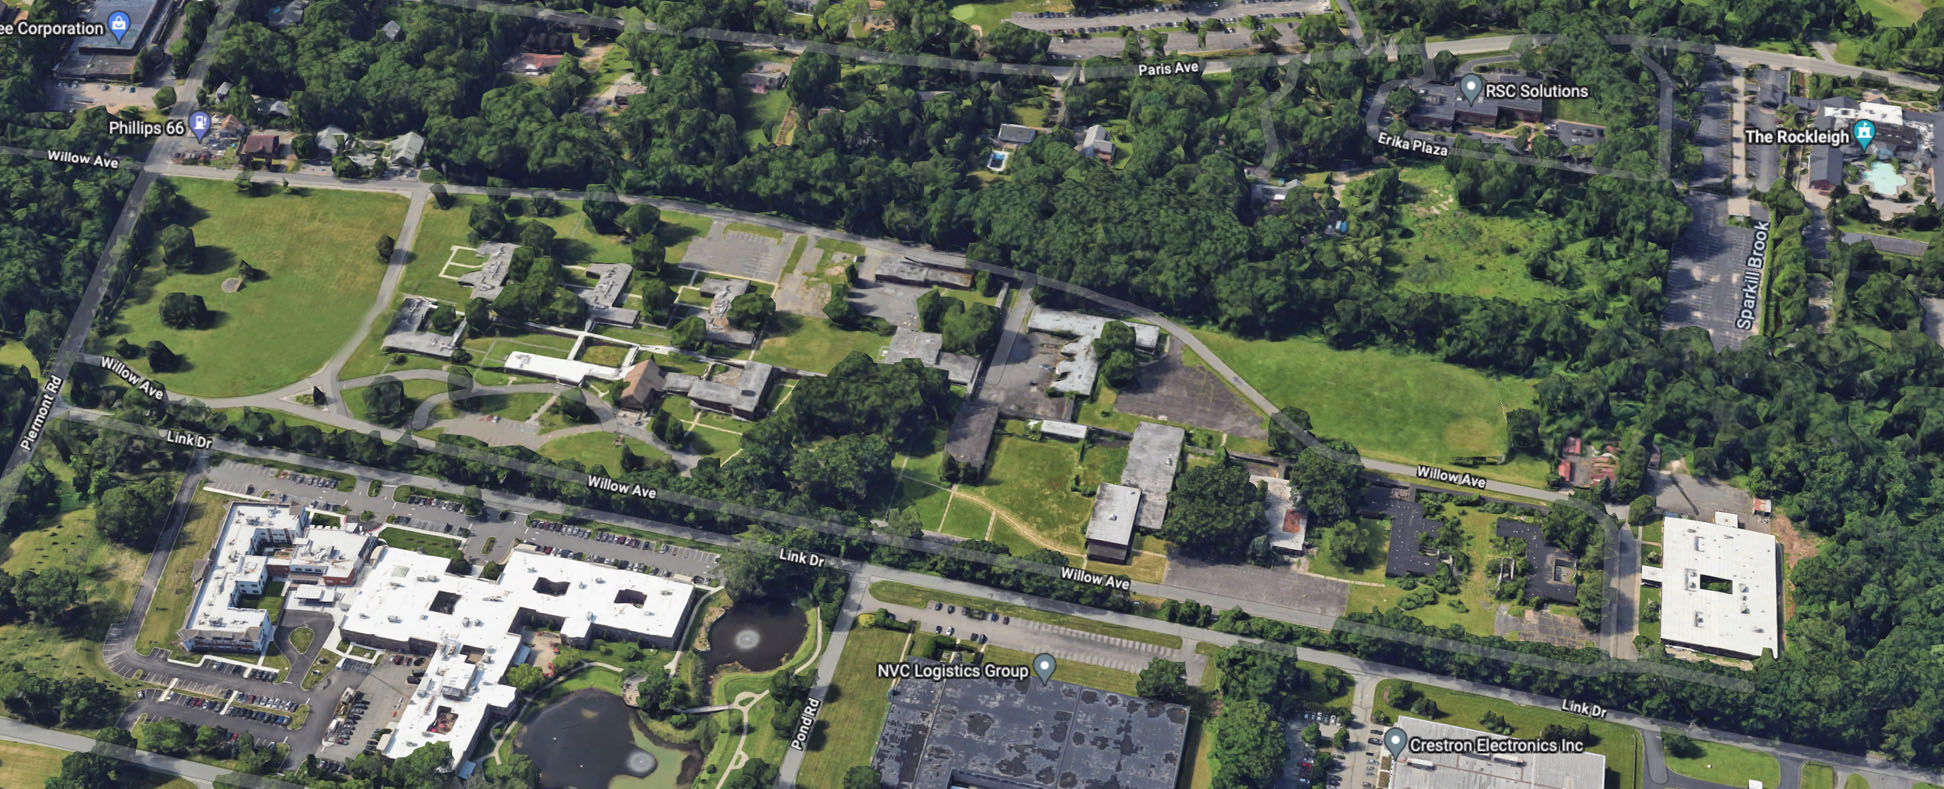 Aerial view of St. Joseph's Village, Rockleigh, NJ